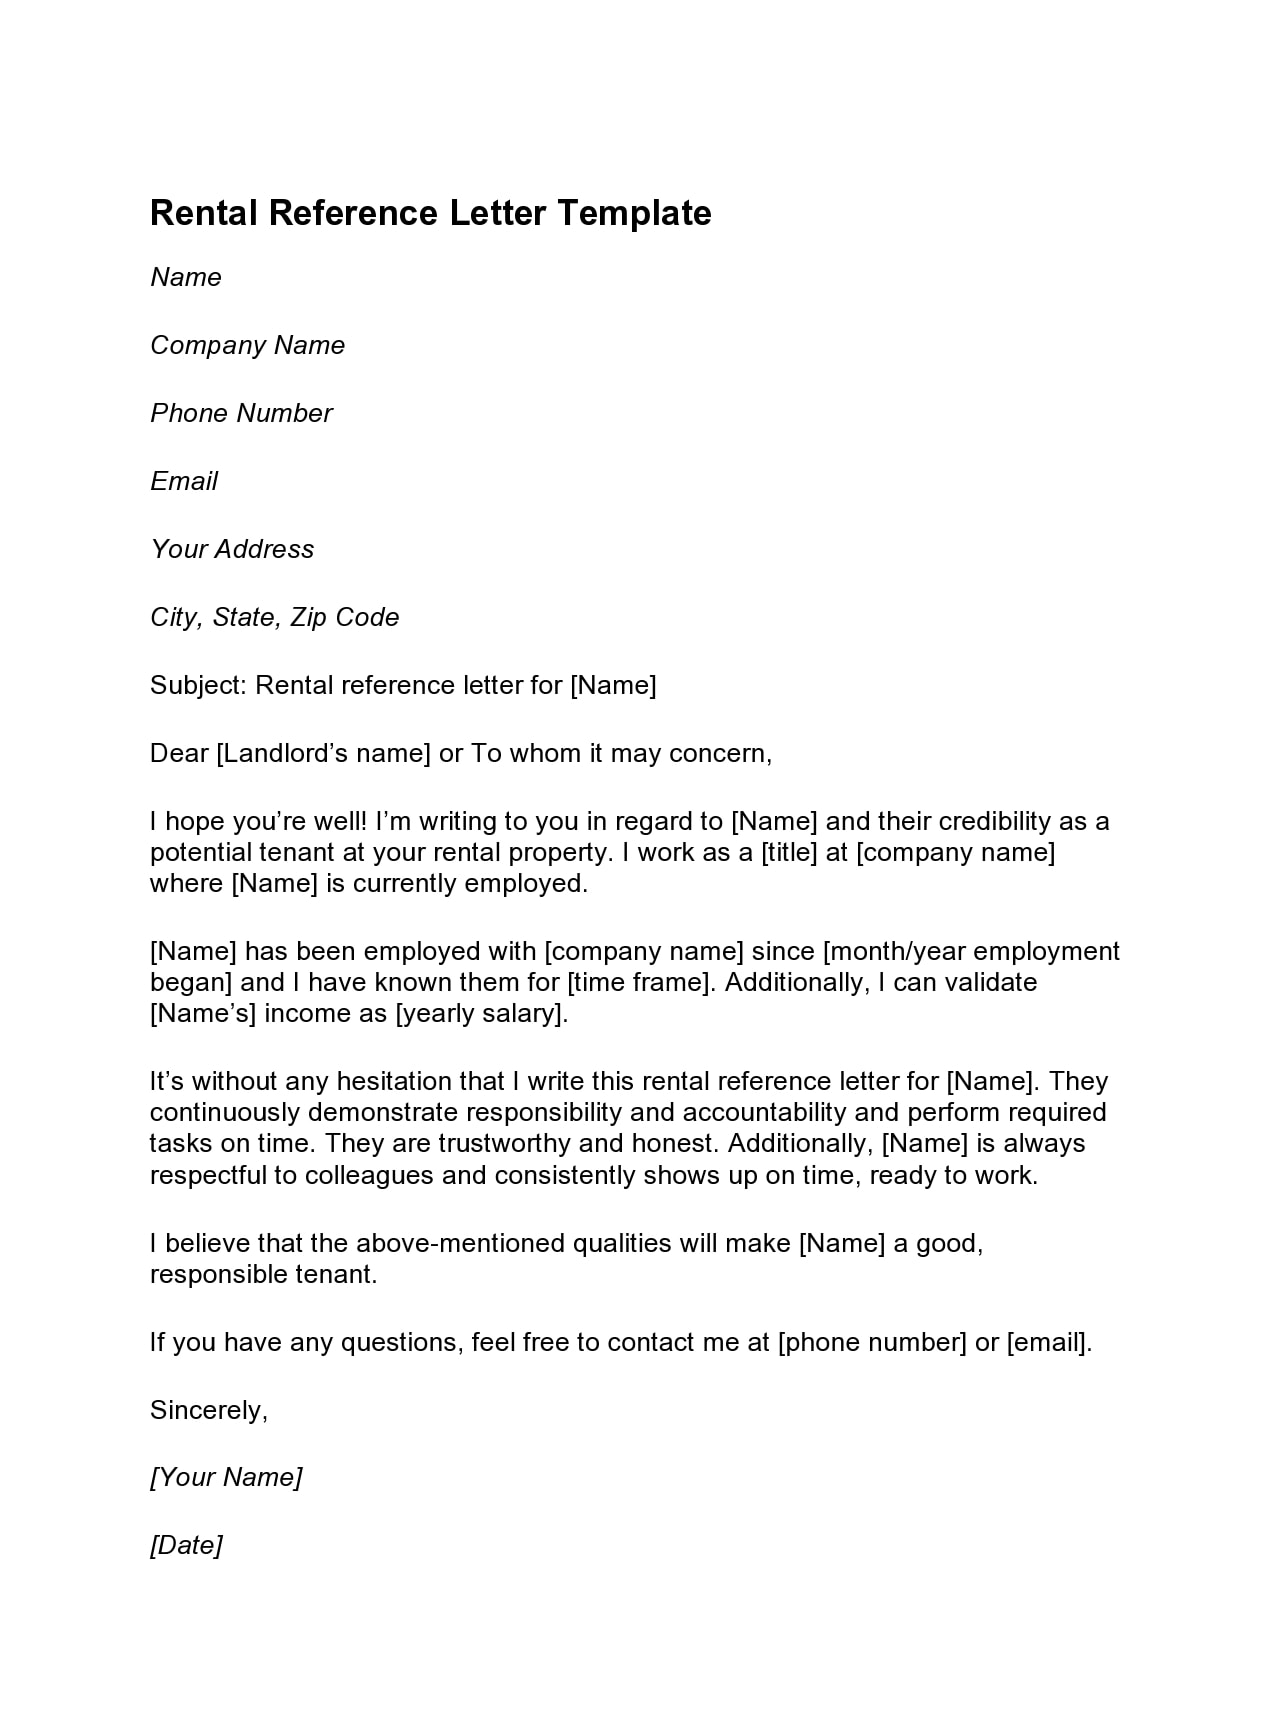 28-amazing-rental-reference-letters-for-tenants-landlords-templatearchive